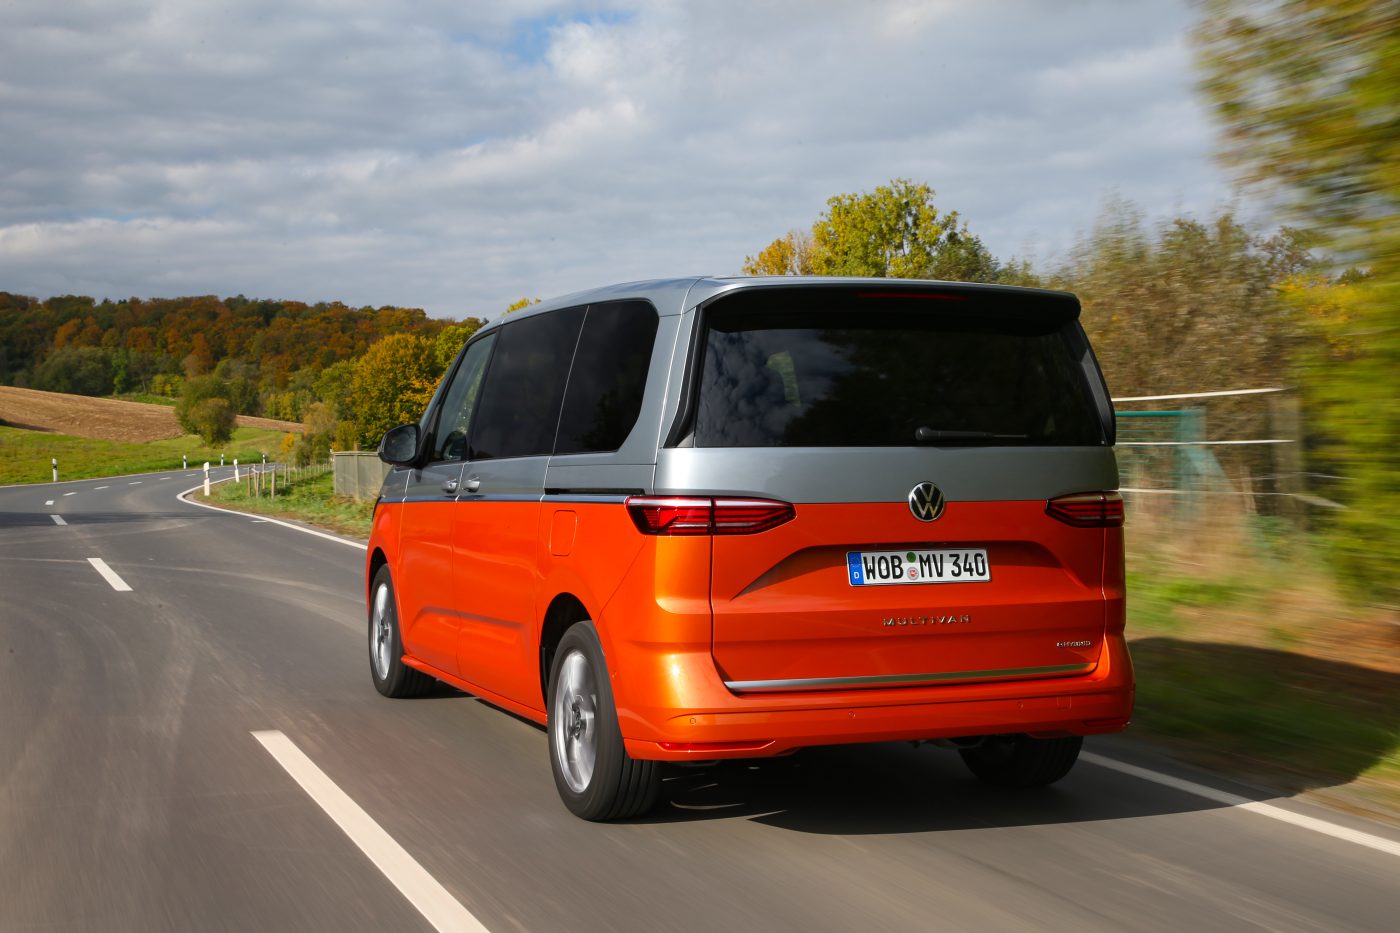 New images of the Volkswagen Multivan T7, the most technological generation